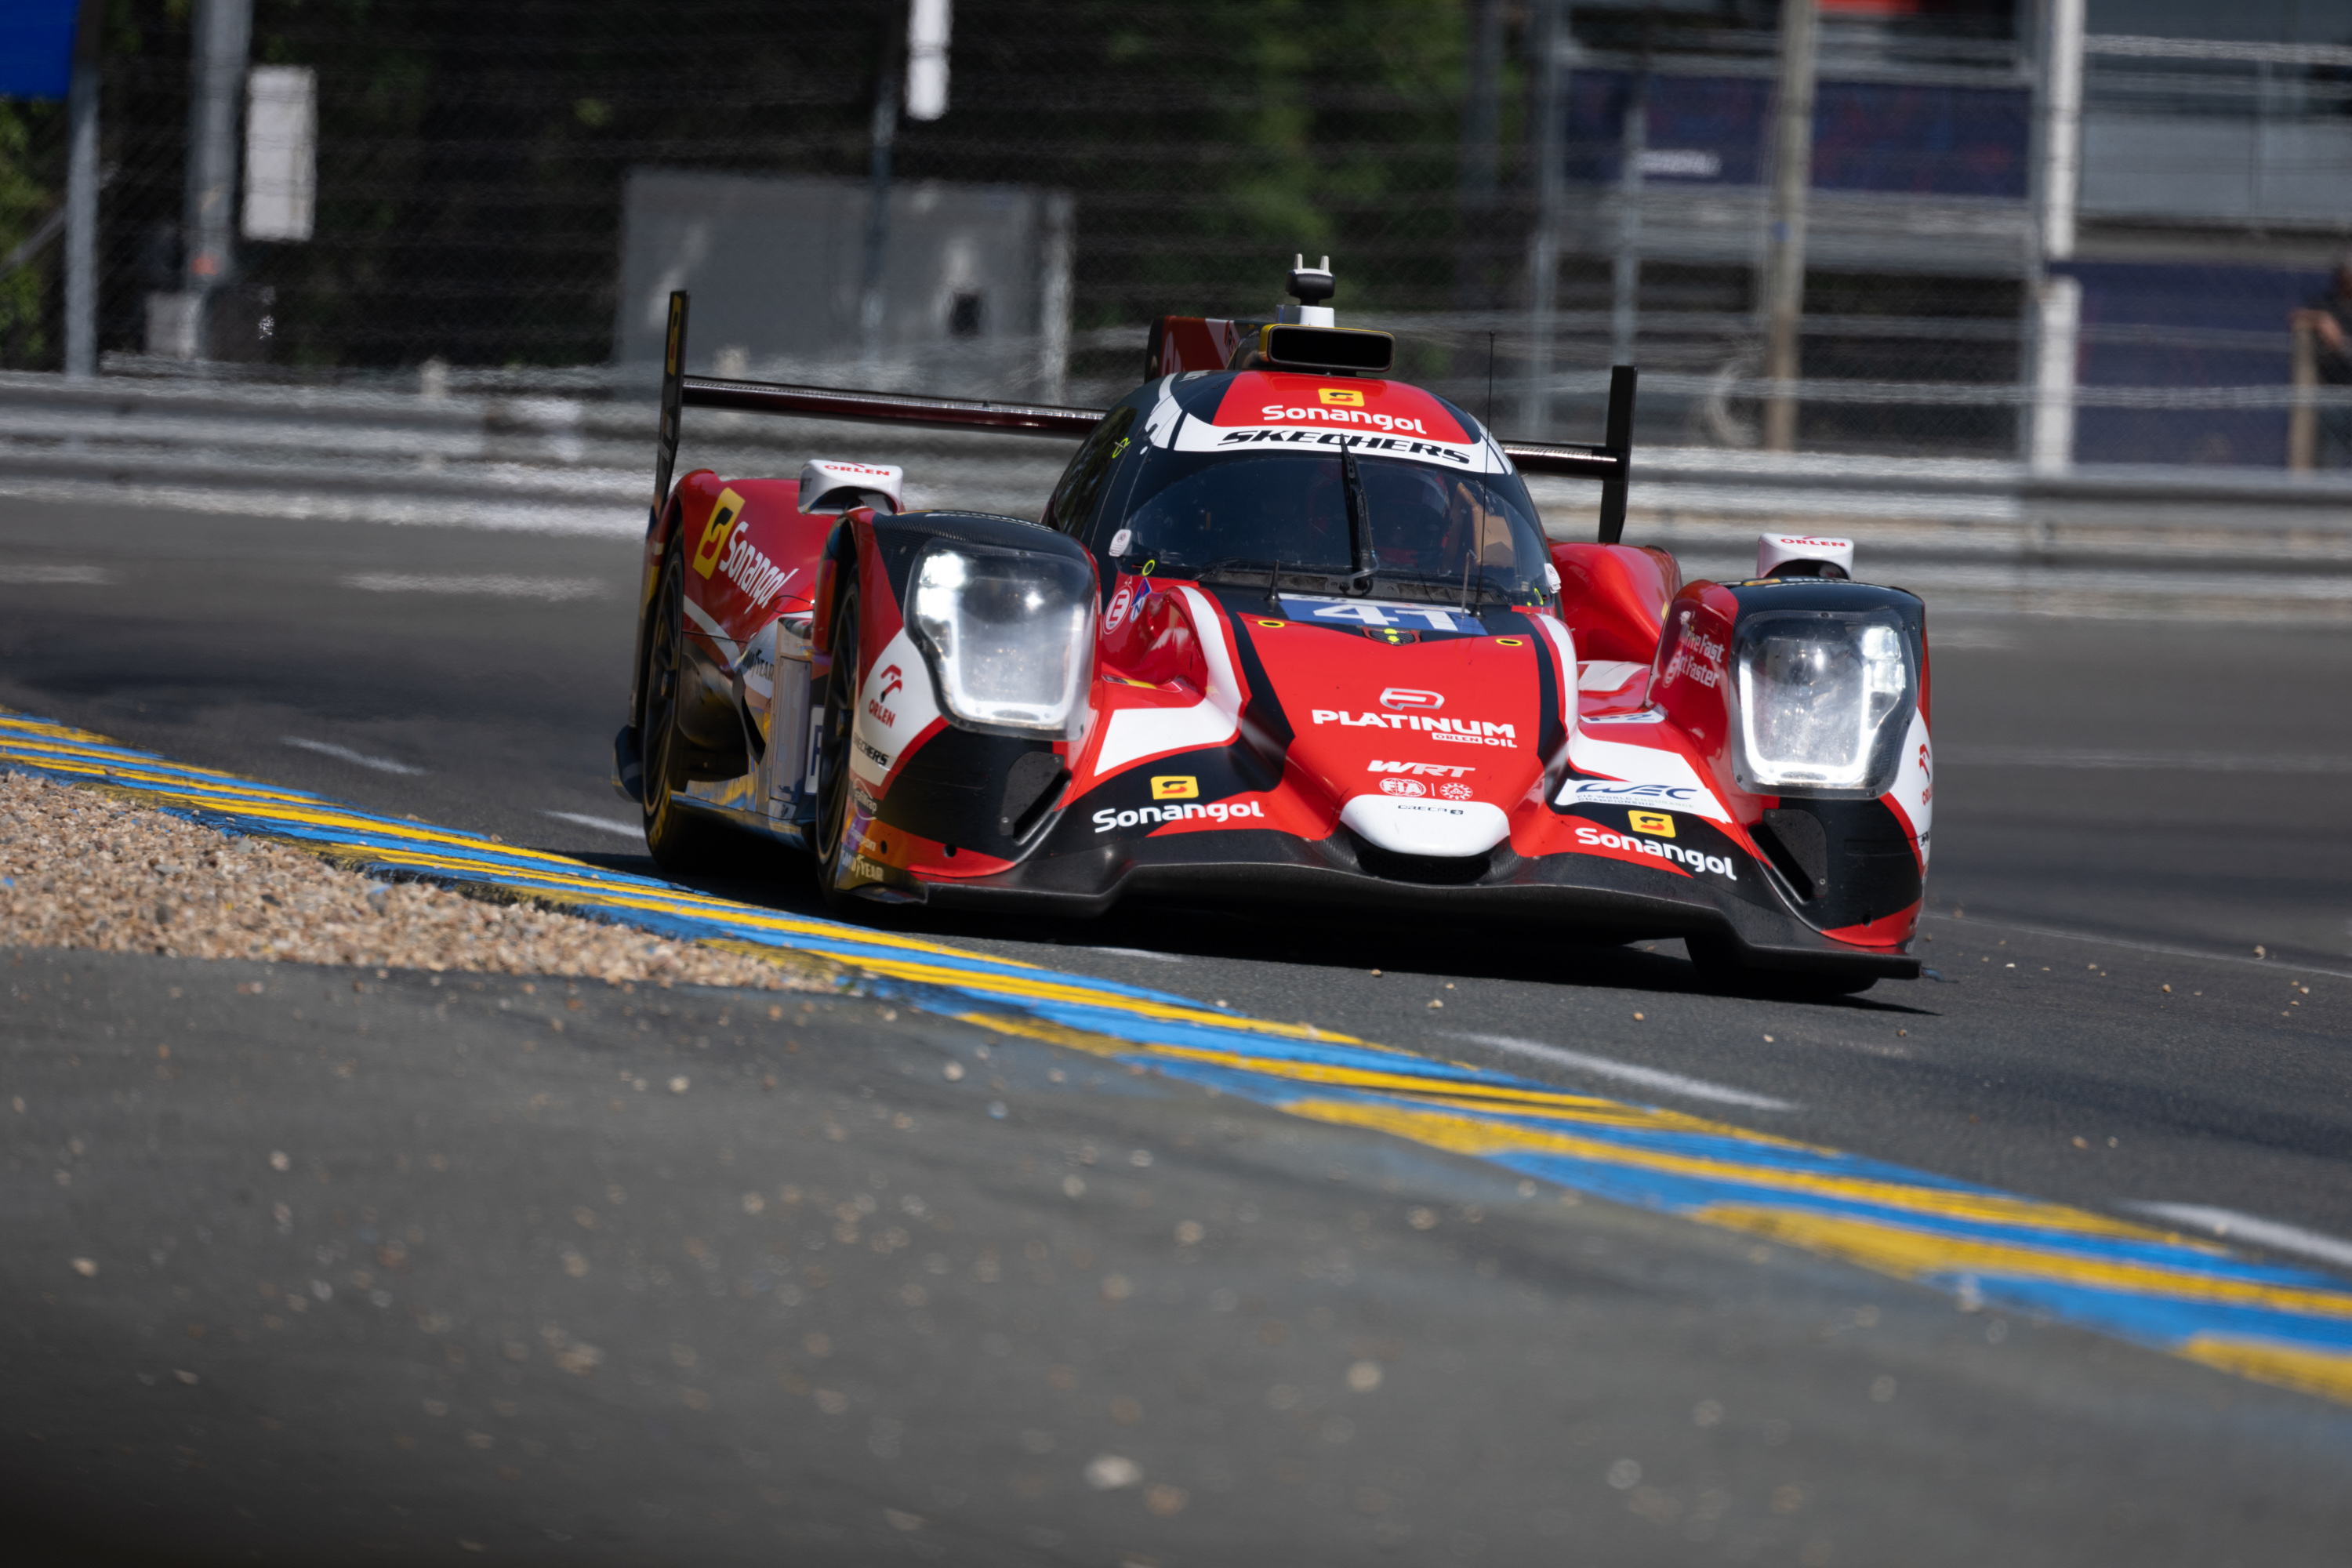 Louis Delétraz is more than eager to clinch his first 24 Hours of Le Mans victory